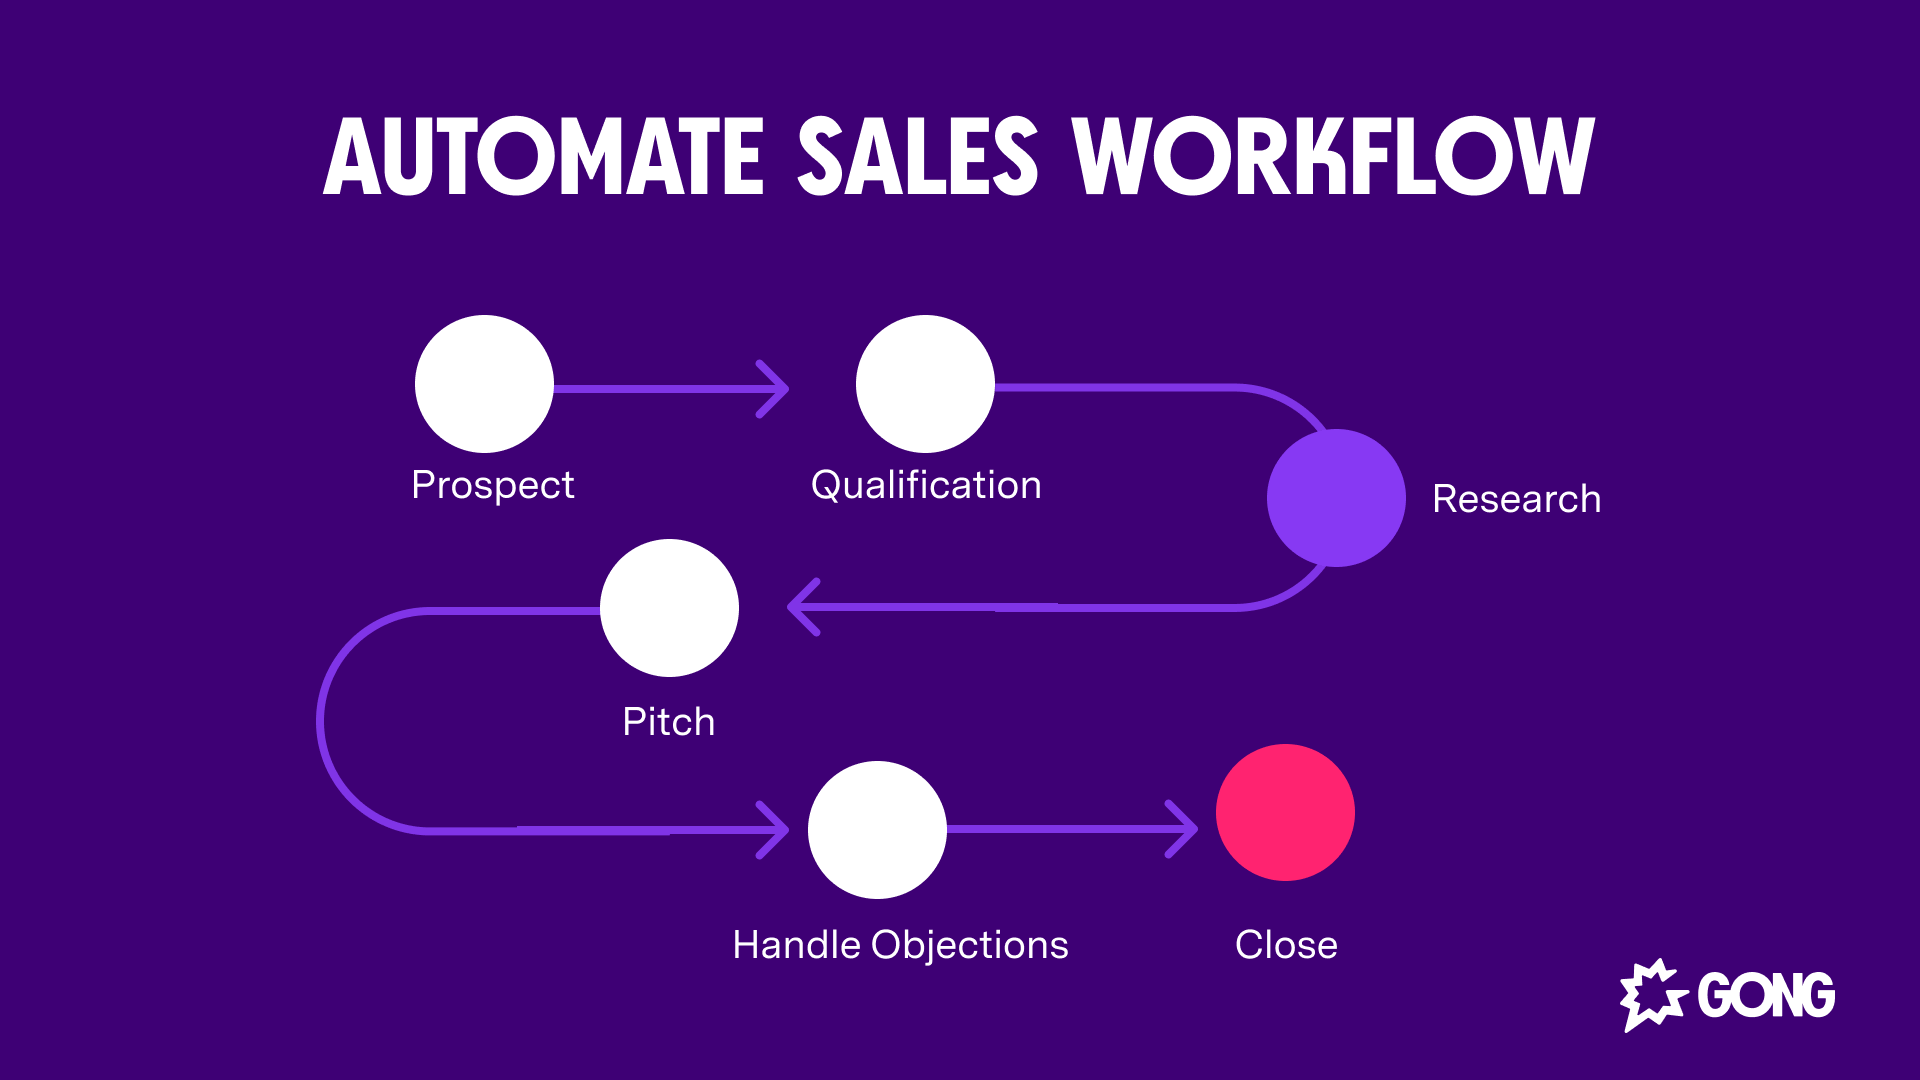 How To Build and Automate a Sales Workflow